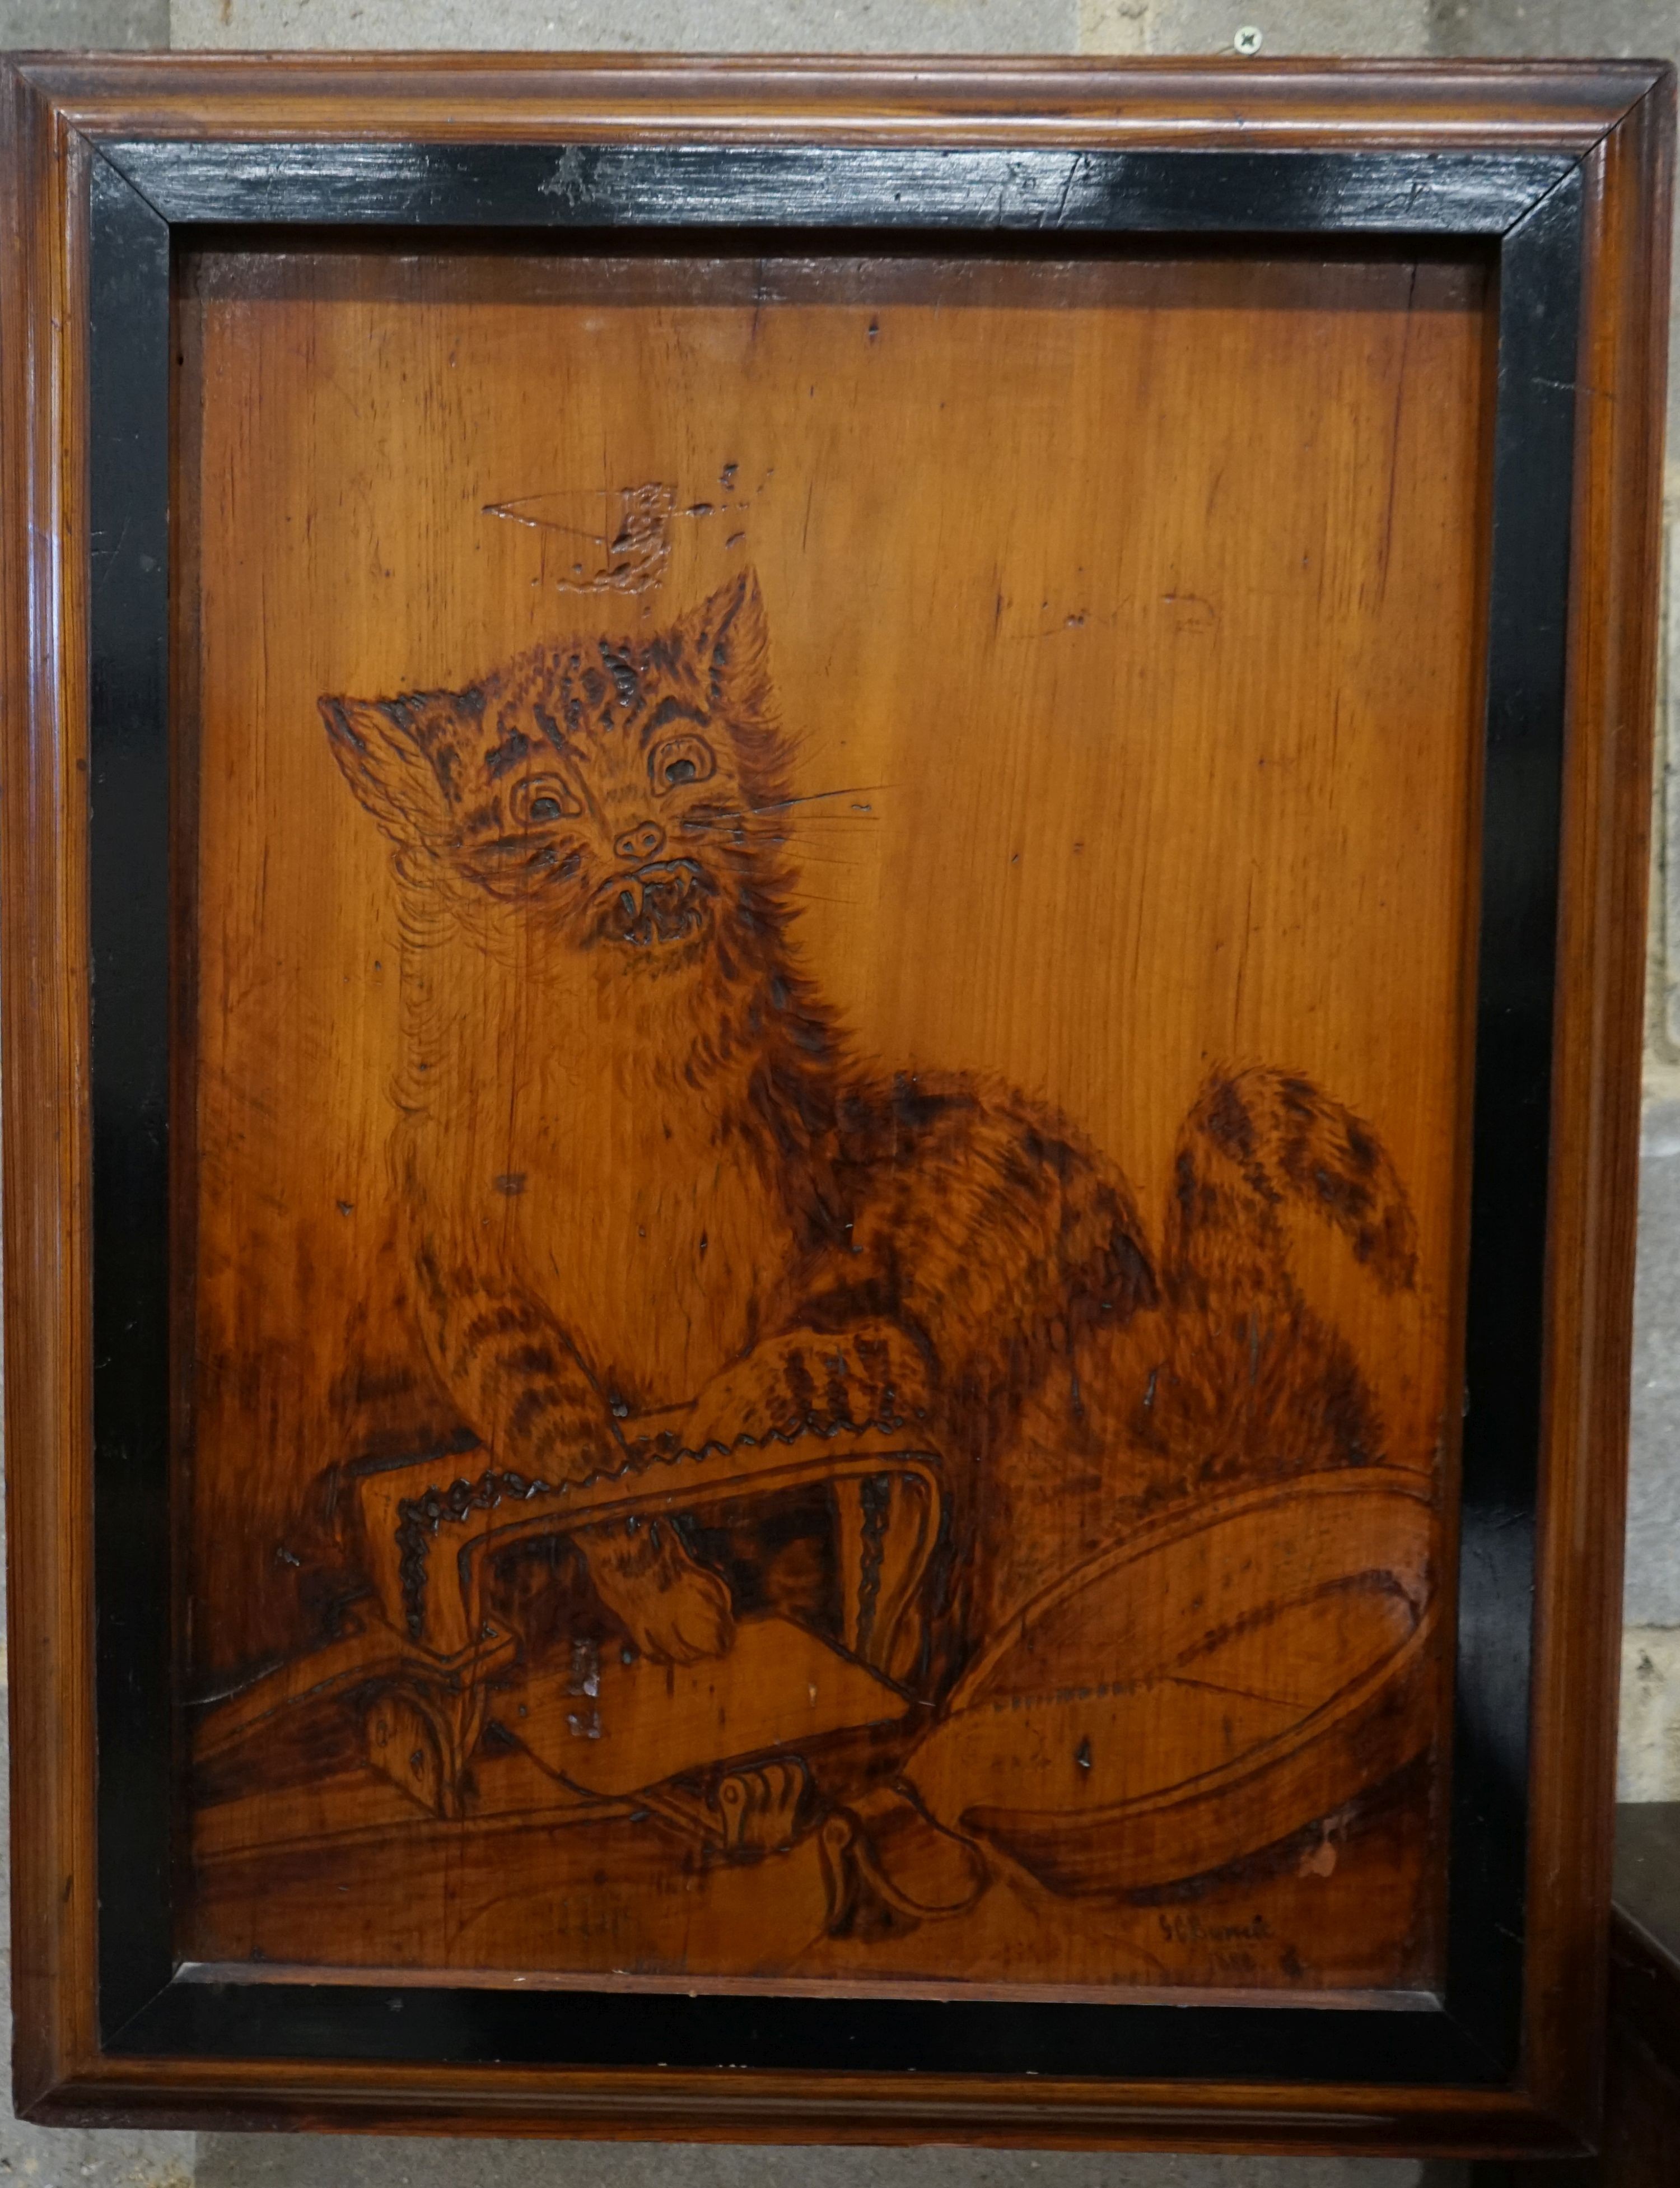 Three Arts & Crafts pokerwork beech panels by G. C. Barrett 1882, 'The cat that didn't get the cream', largest 58 x 43cm in polished wood and ebonised frames